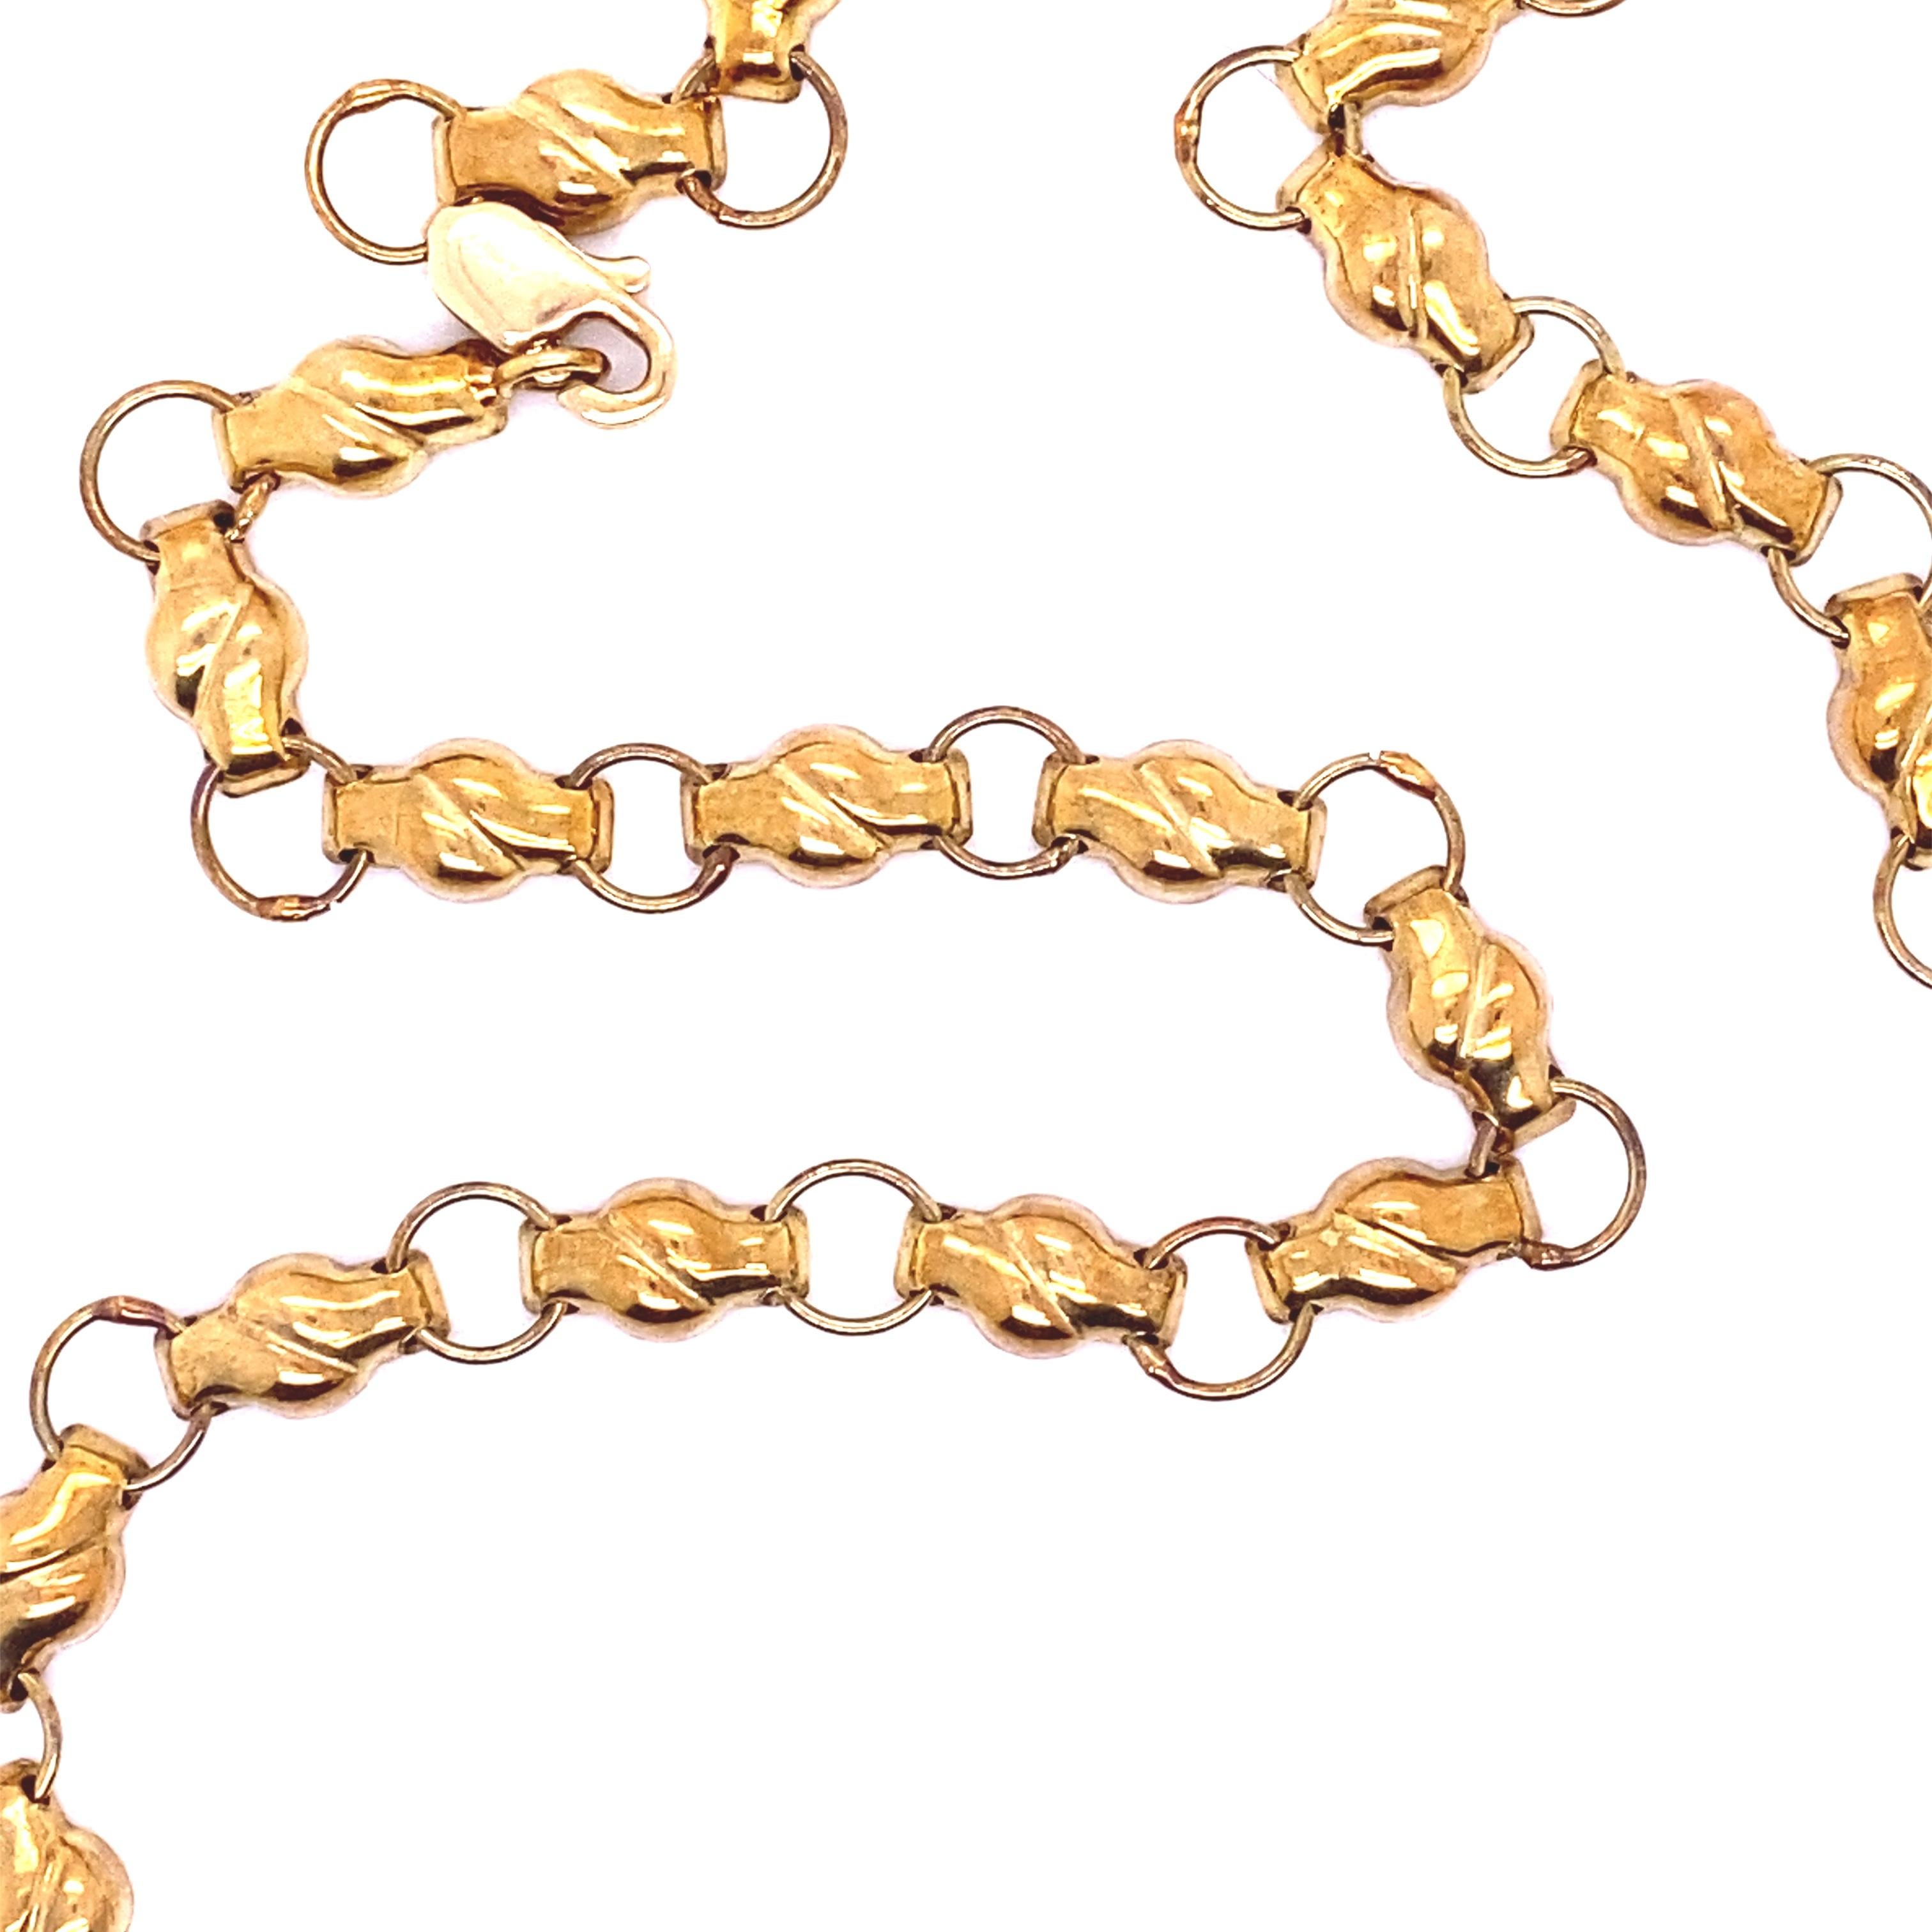 Vintage, Antique, 18 Inch Solid 14kt Yellow Gold Chain Link Necklace, solid links with flat backs. 11.82 grams total weight.